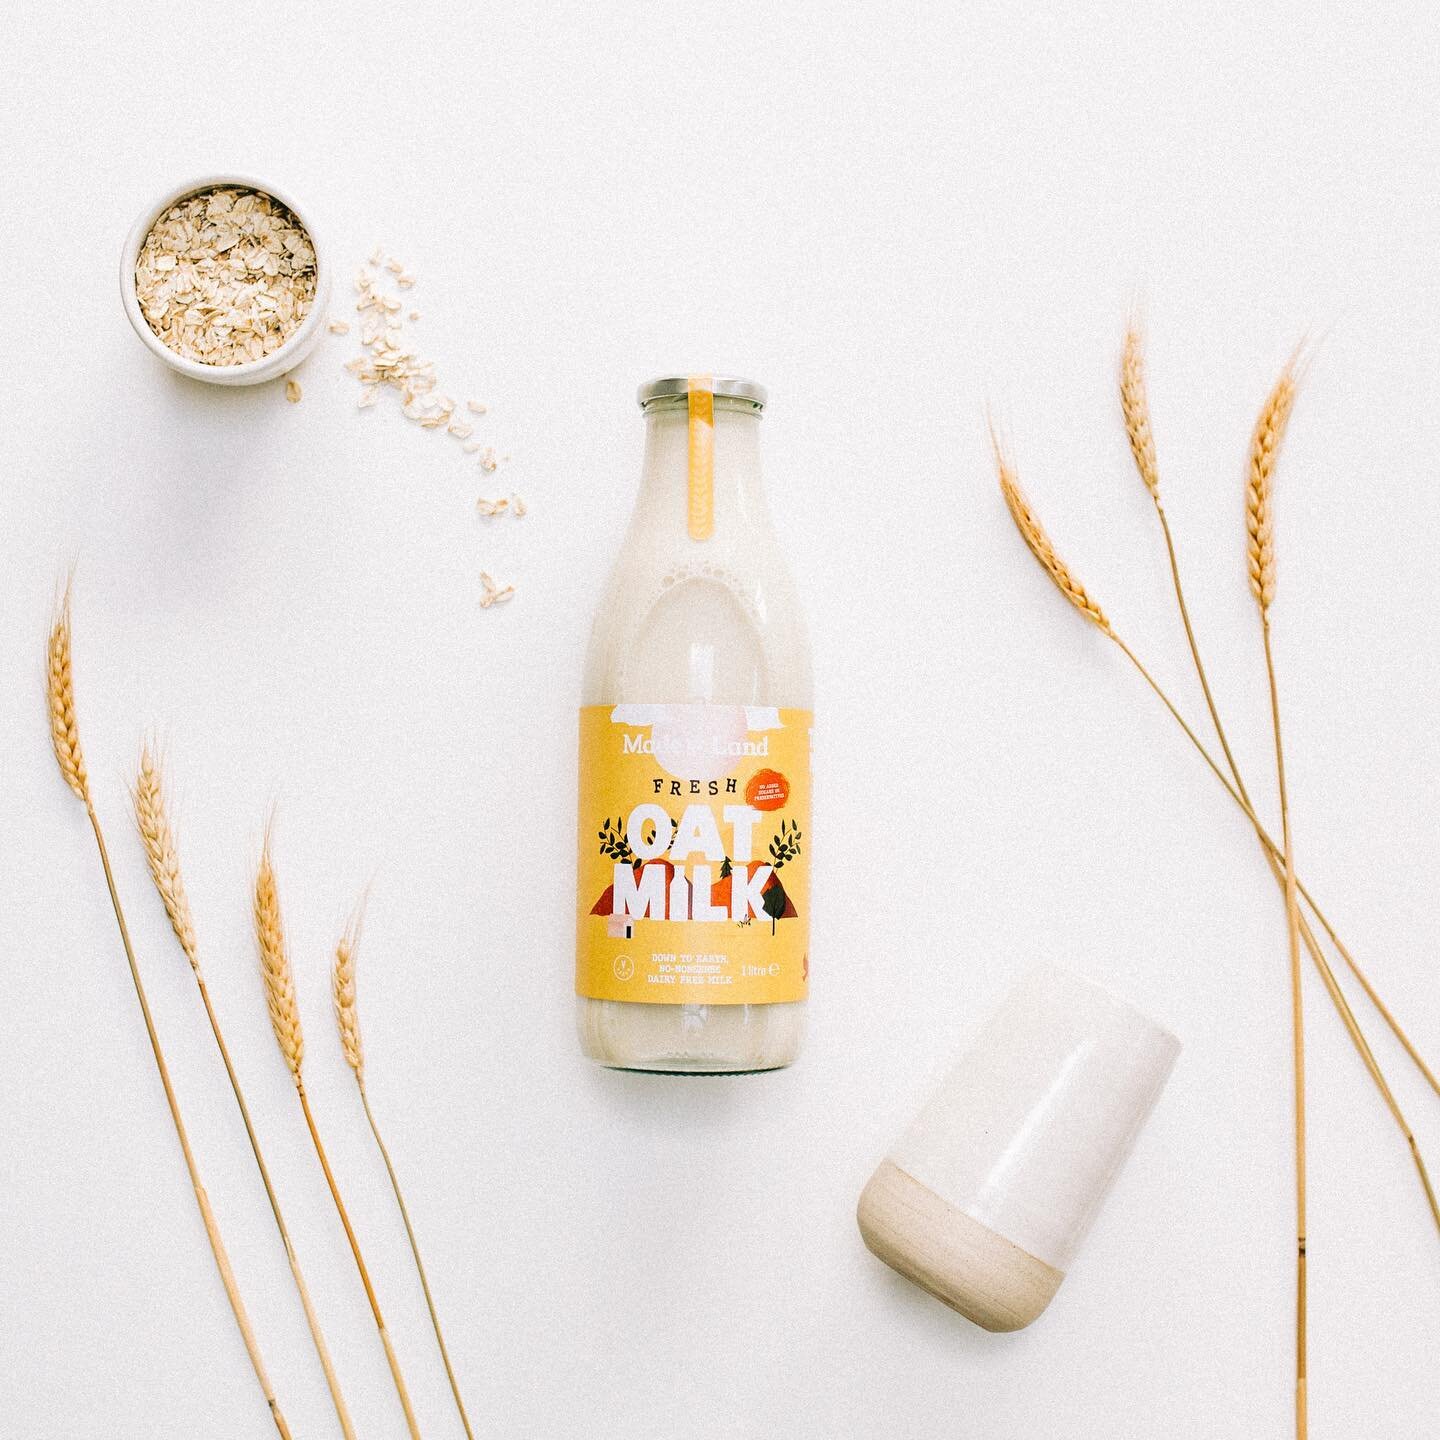 OAT MILK  we&rsquo;re starting to get ready to come back to all you lovelies this August and we&rsquo;ve got some amazing new things to share. This @made_by_land oat milk will be on our website to add to any of your orders! It&rsquo;s made in Penarth